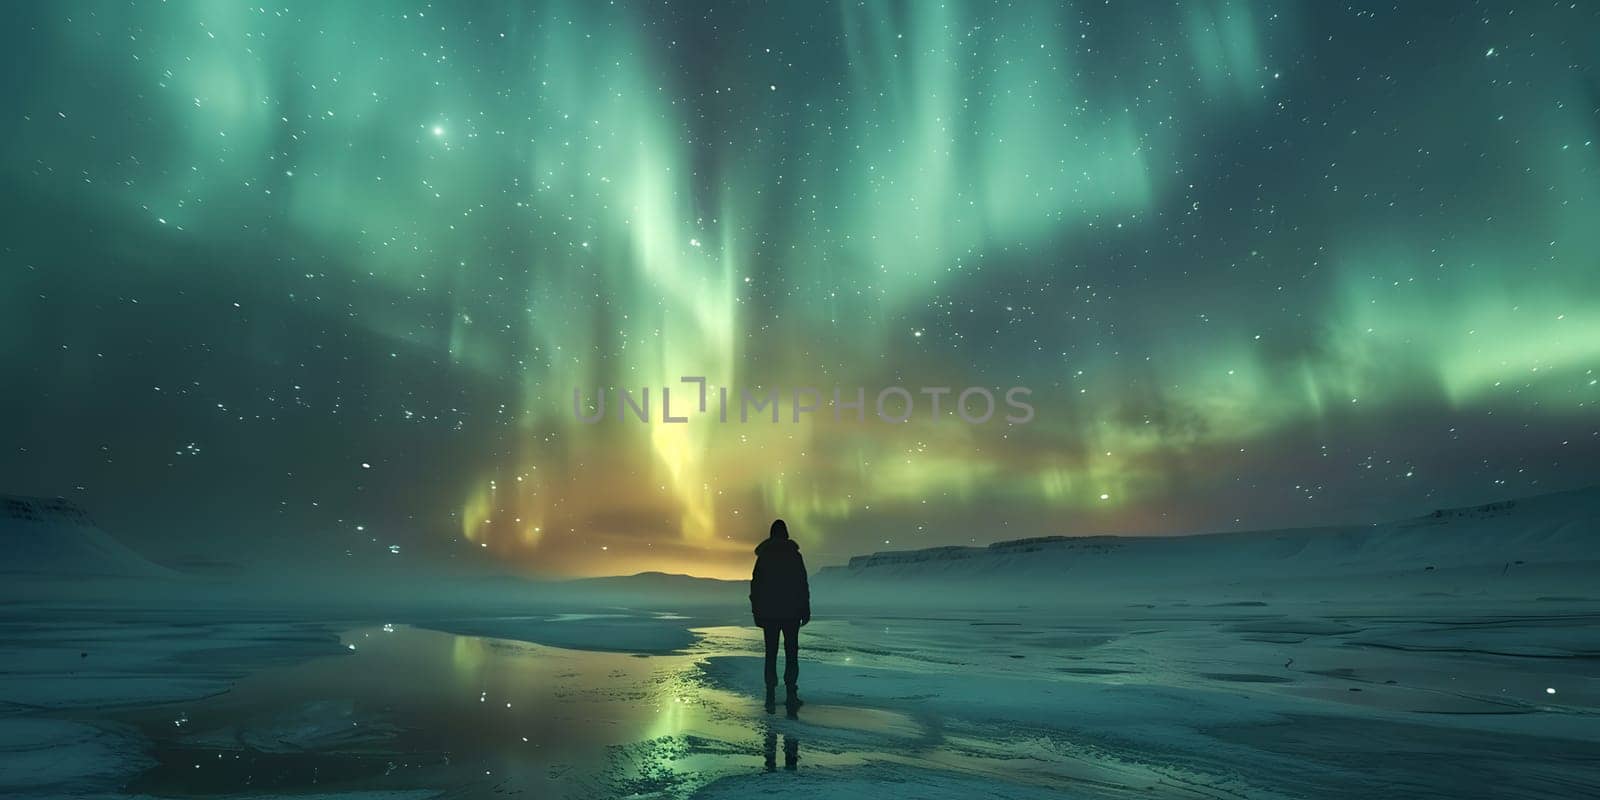 A person stands in a snowy field admiring the aurora borealis in the sky, surrounded by the serene landscape and the natural beauty of the atmosphere